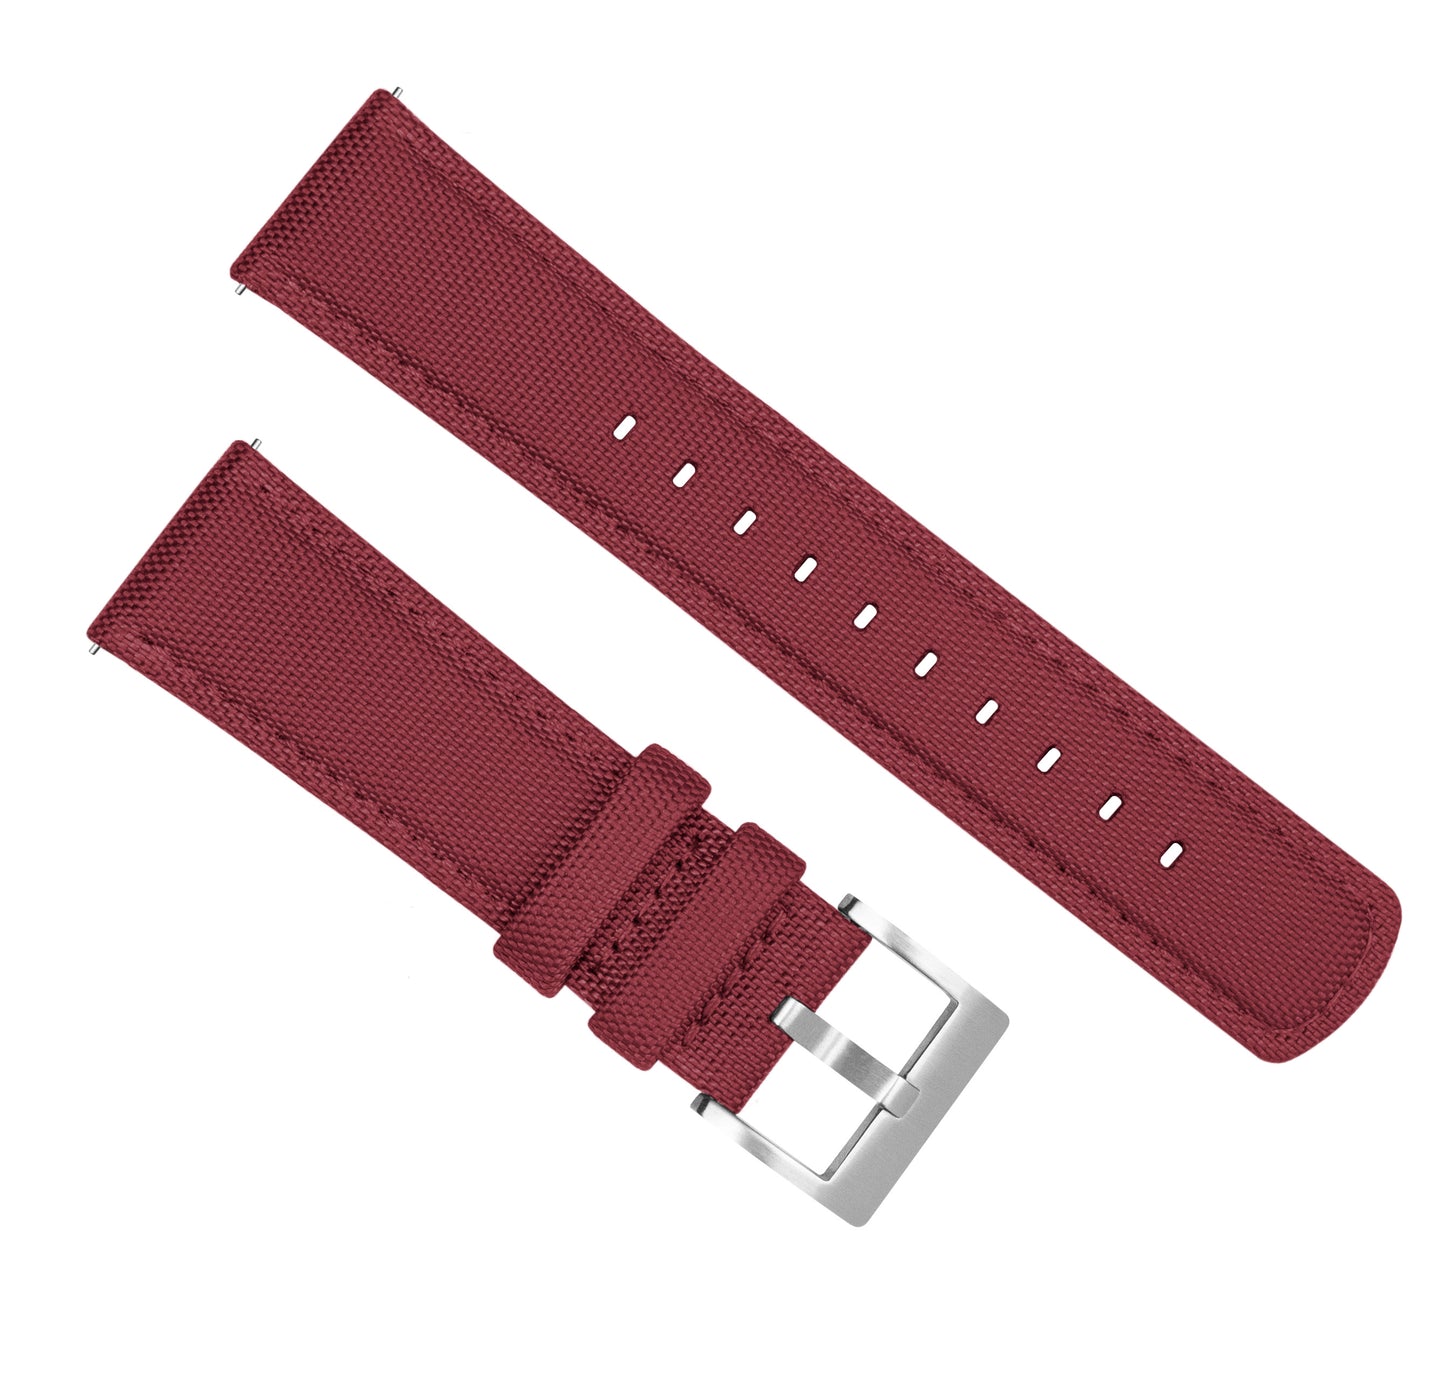 Fossil Sport | Sailcloth Quick Release | Raspberry Red - Barton Watch Bands